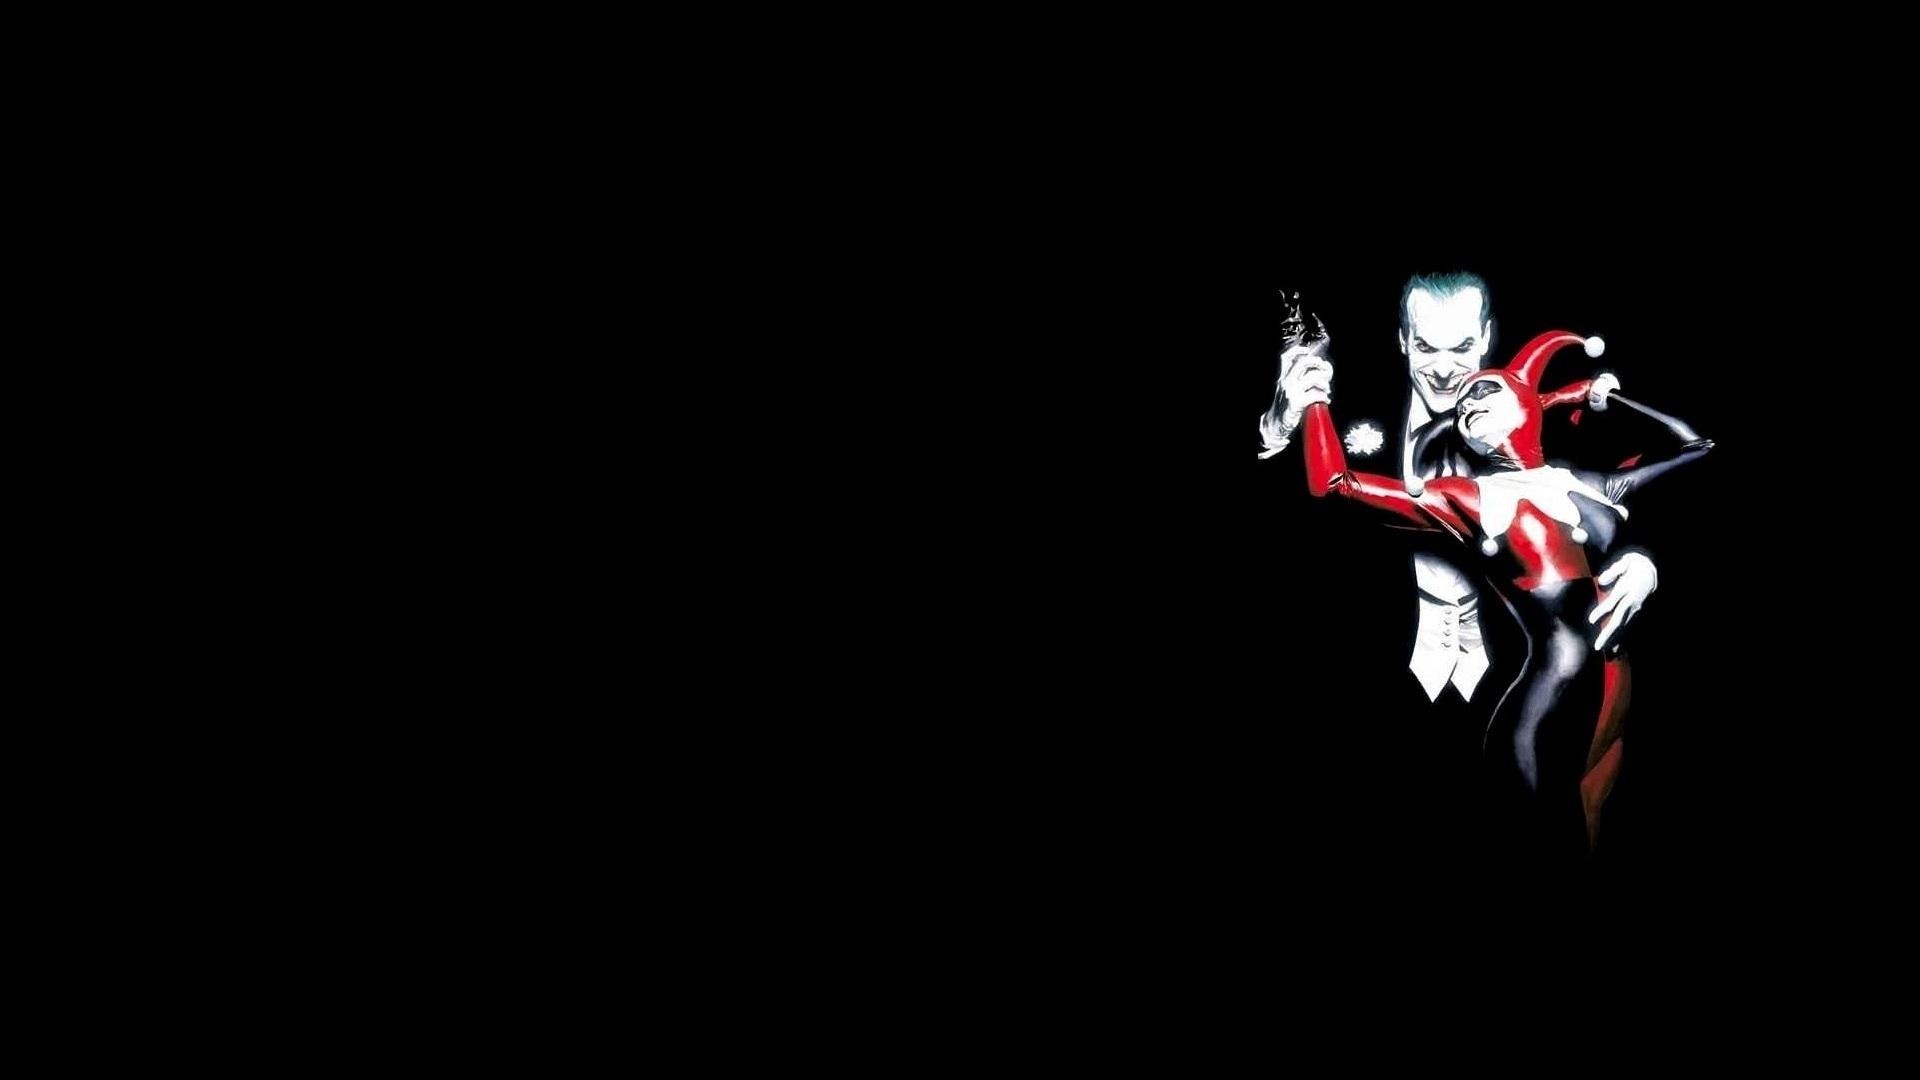 Joker And Harley HD Wallpaper with image resolution 1920x1080 pixel. You can make this wallpaper for your Desktop Computer Backgrounds, Mac Wallpapers, Android Lock screen or iPhone Screensavers